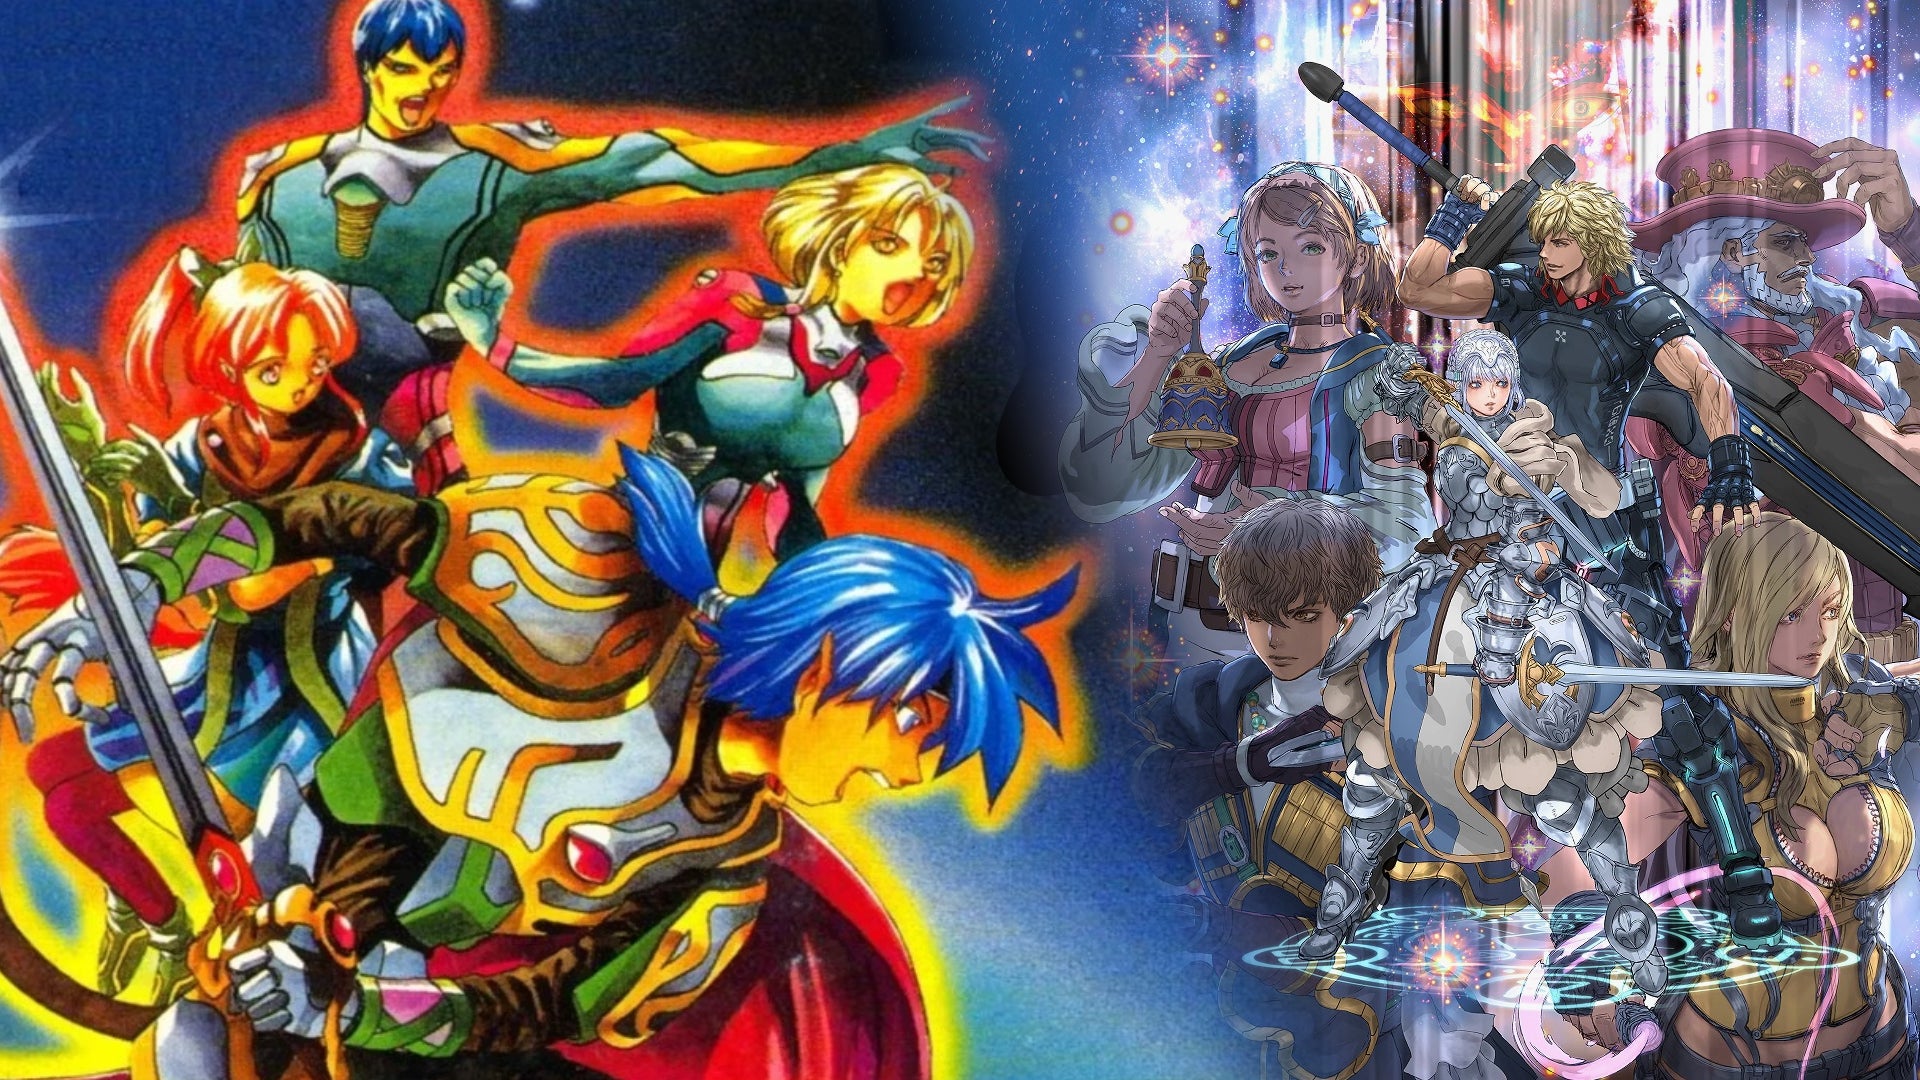 Image for Star Ocean turns 26 today, and I’m so glad Square Enix’s spacefaring B-movie RPG is still going strong